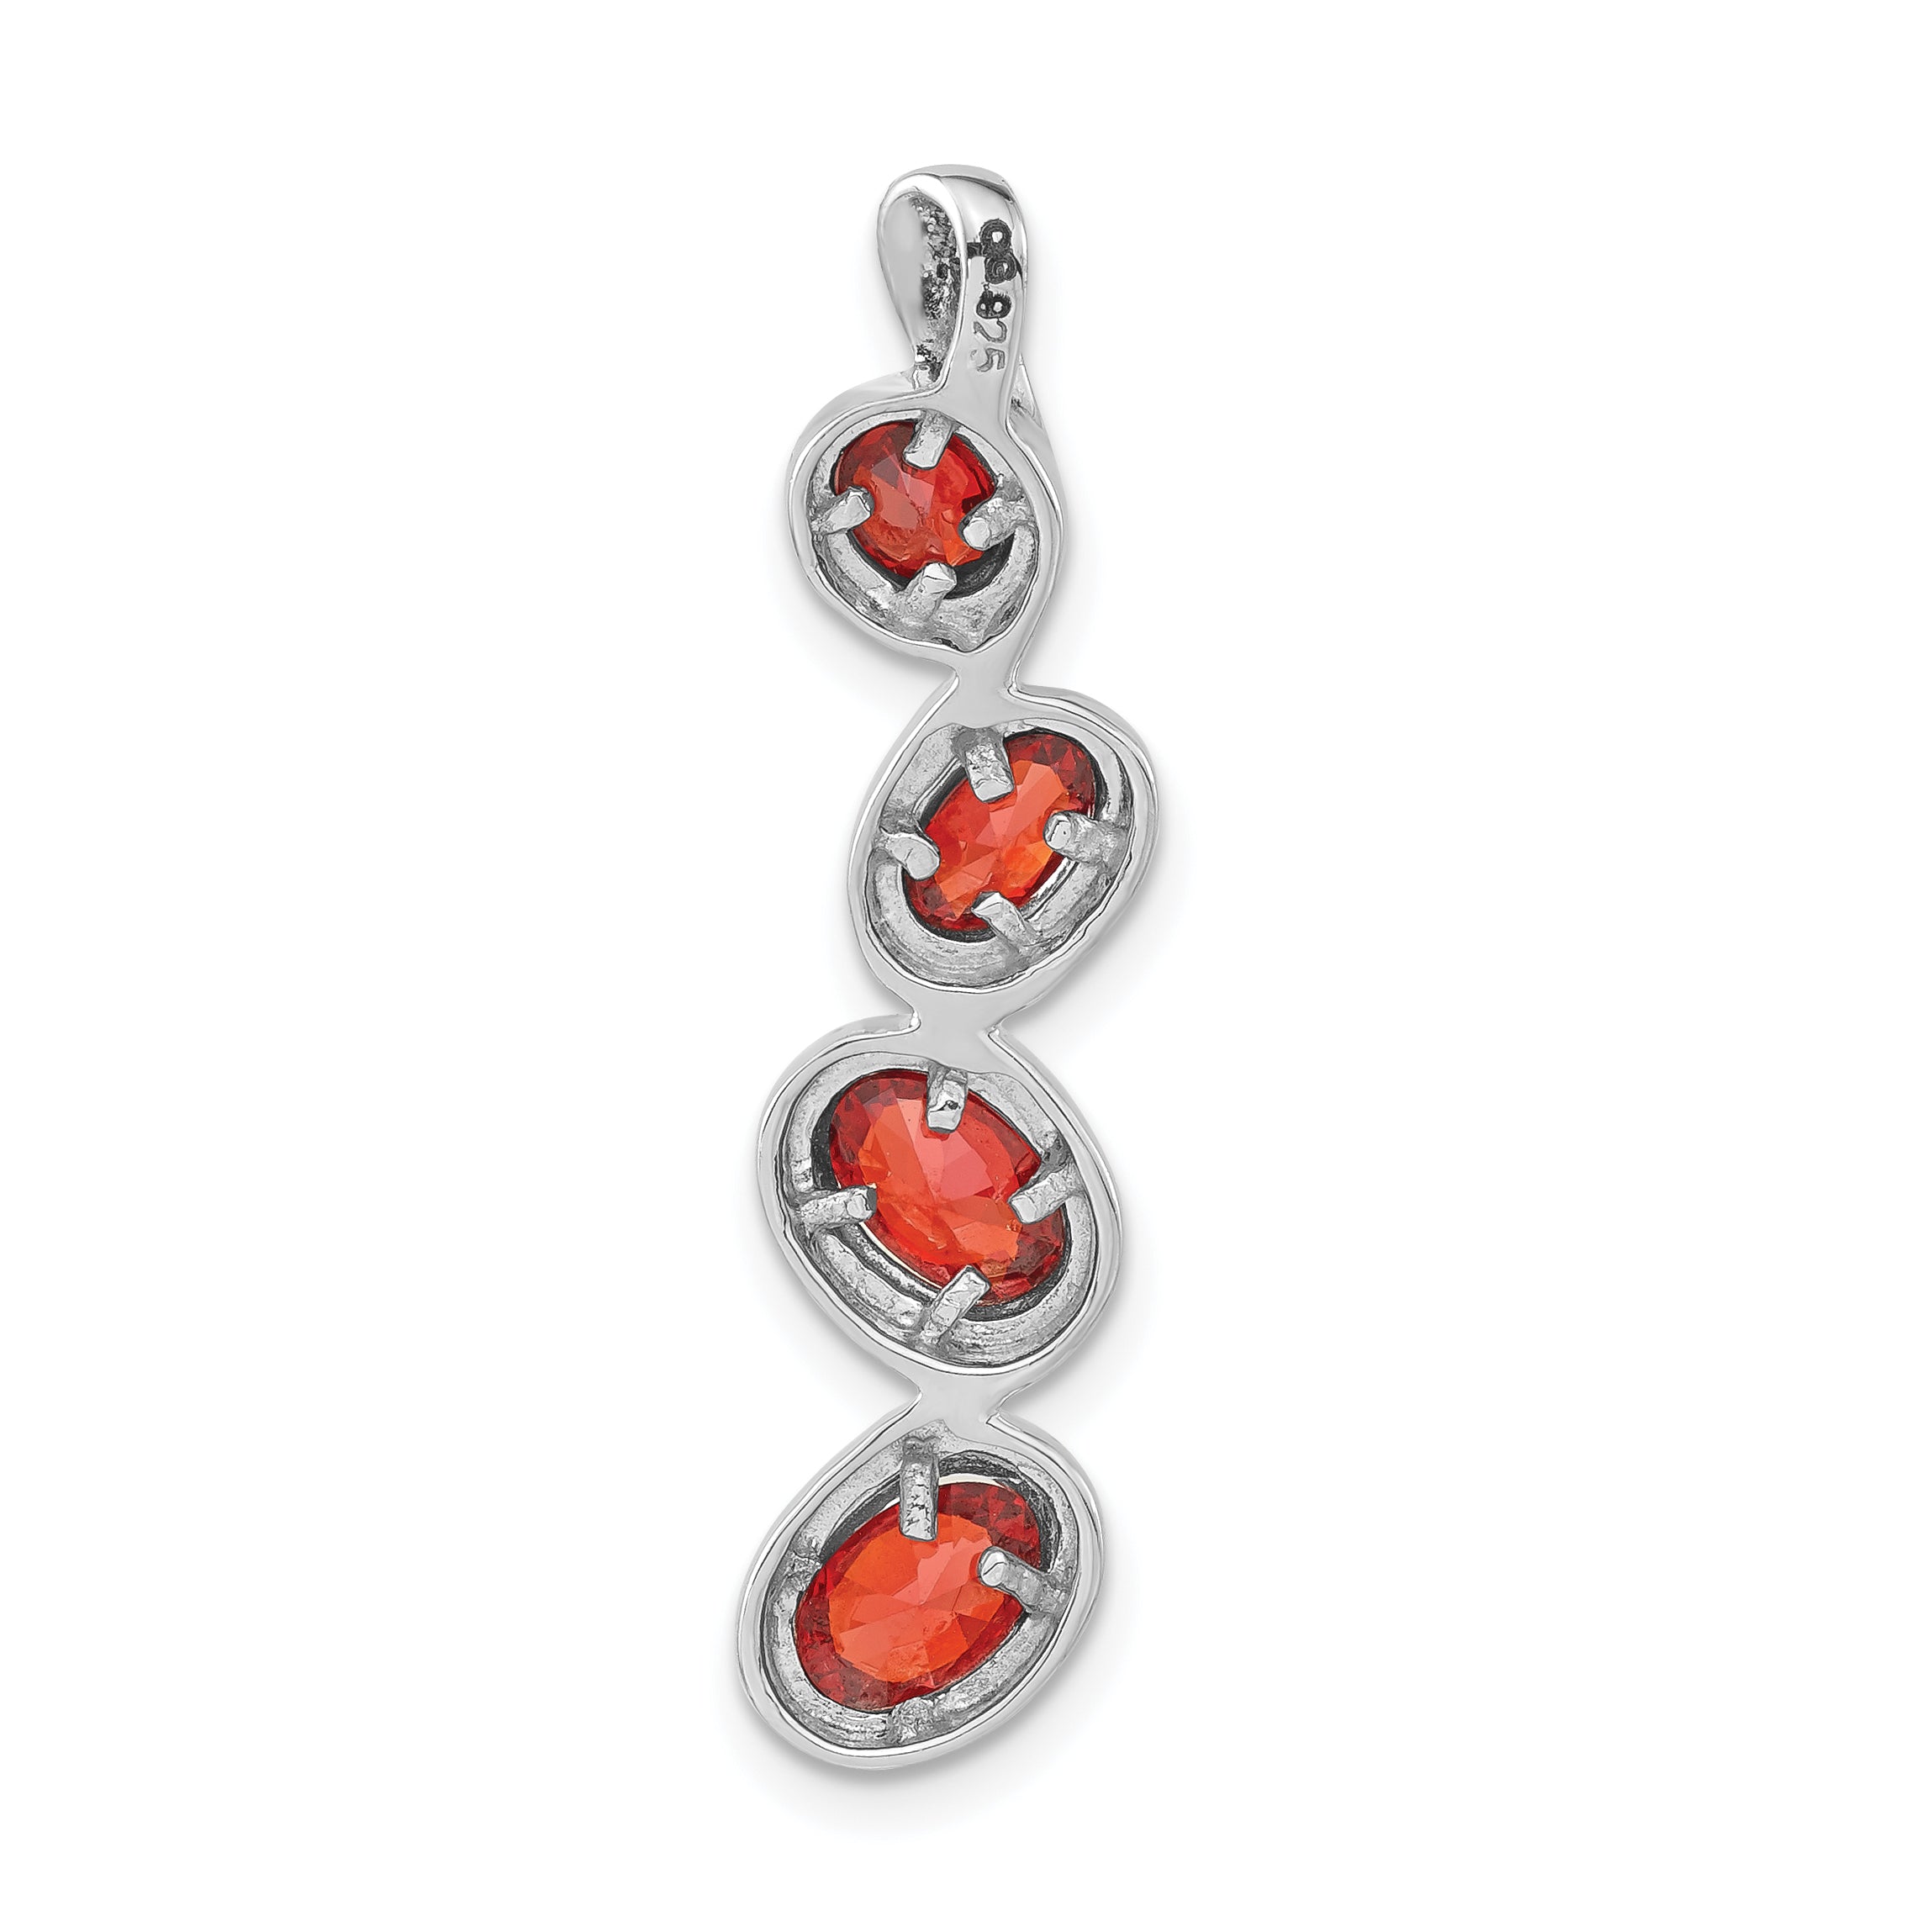 Sterling Silver Red CZ Pendant